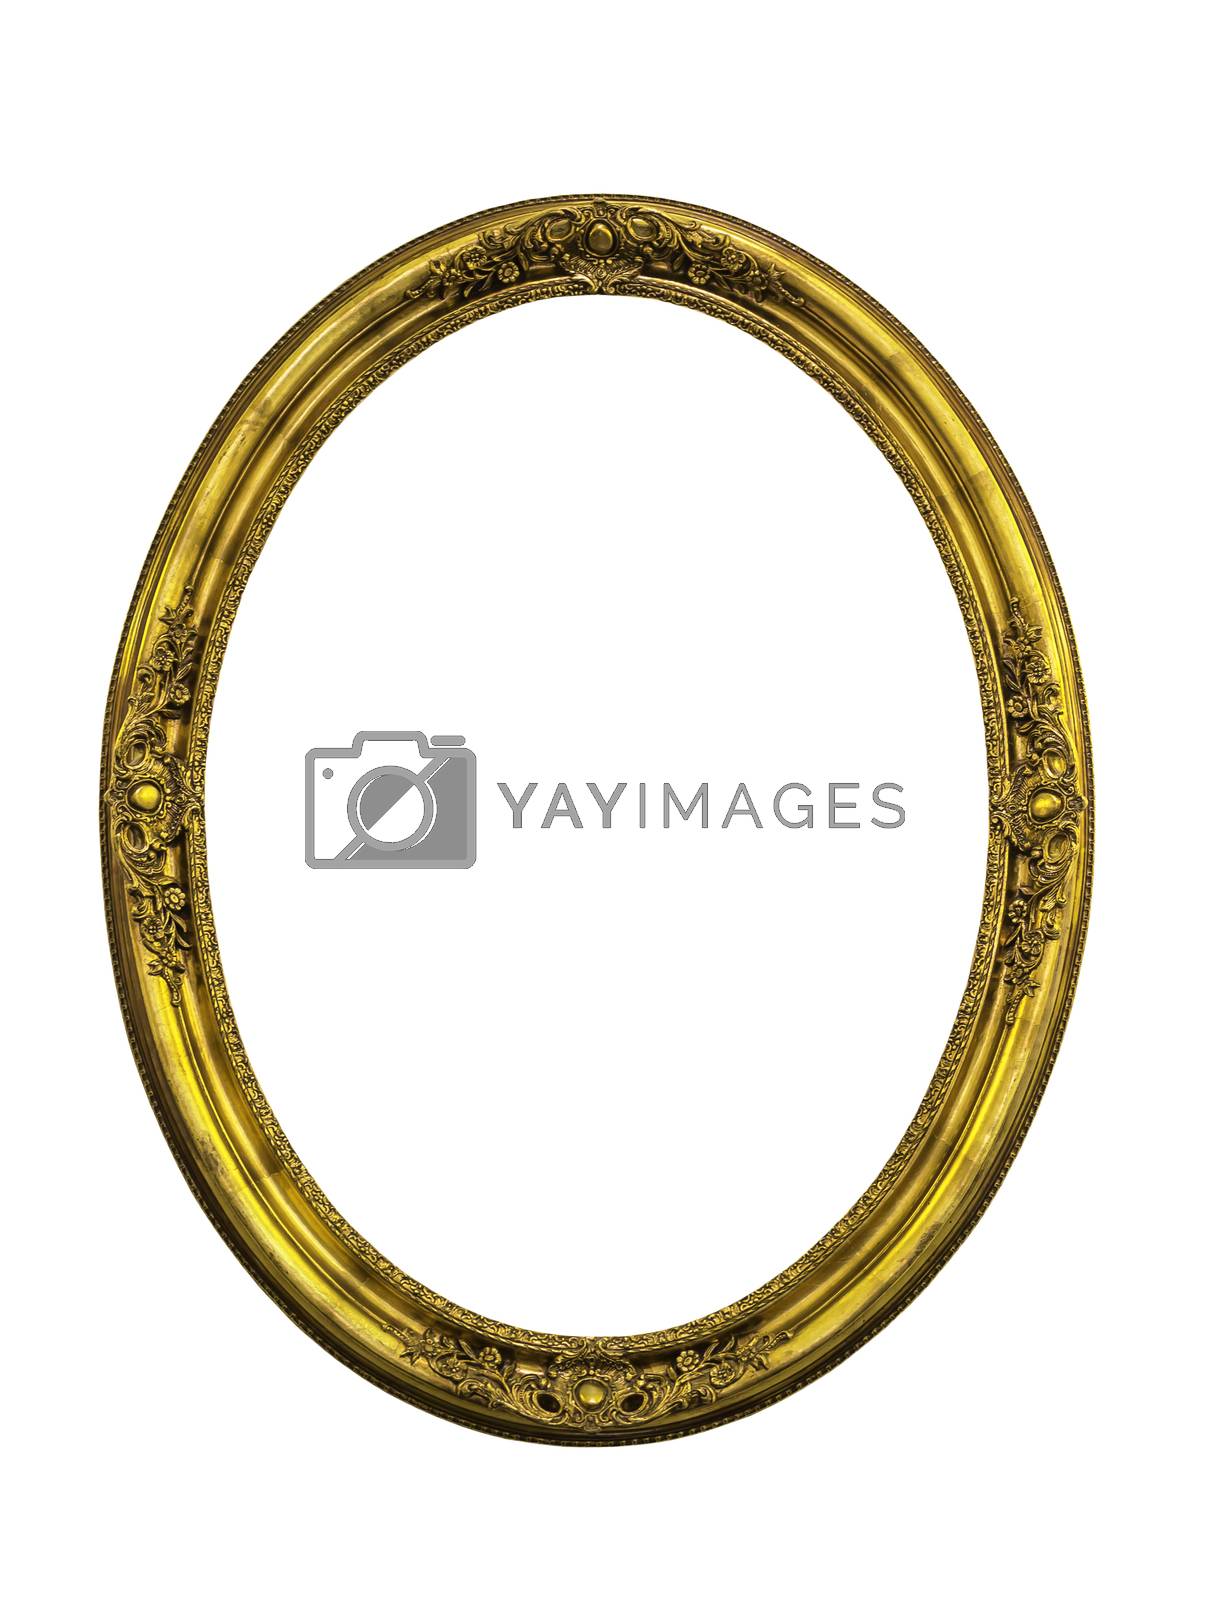 Royalty free image of Golden classic ellipse frame isolated  by manusy